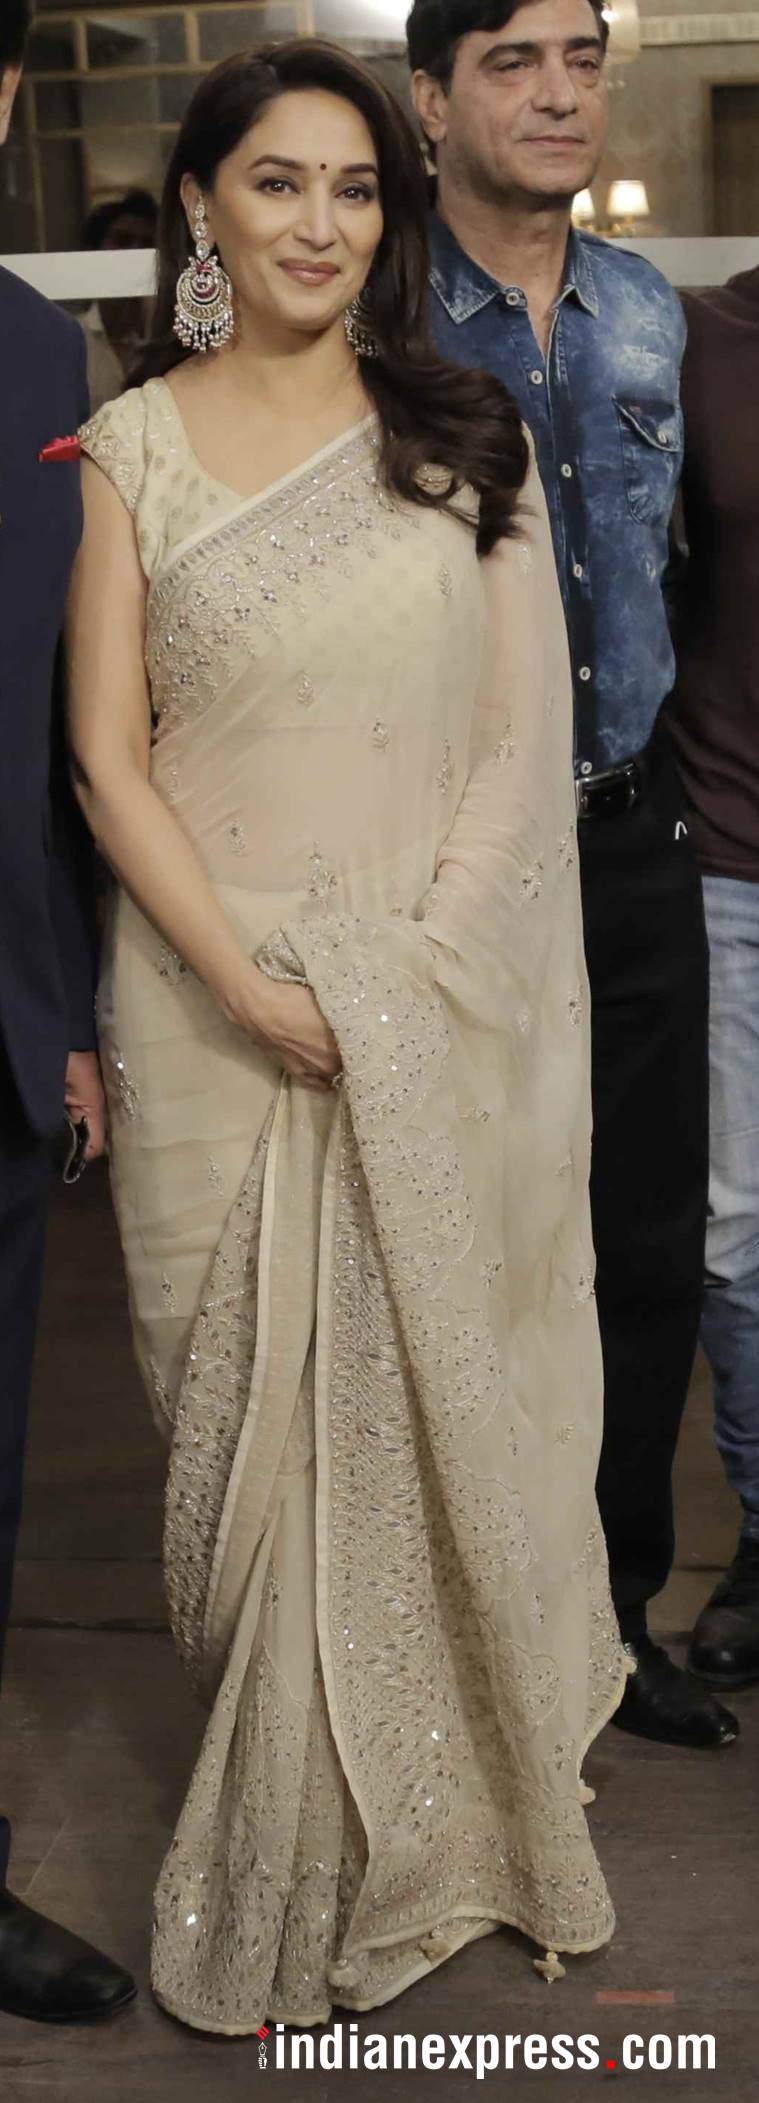 Naked Indian Actress Madhuri Pics - Madhuri Dixit's lovely Anita Dongre sari will inspire you to go for nude  ethnic wear | Lifestyle News,The Indian Express